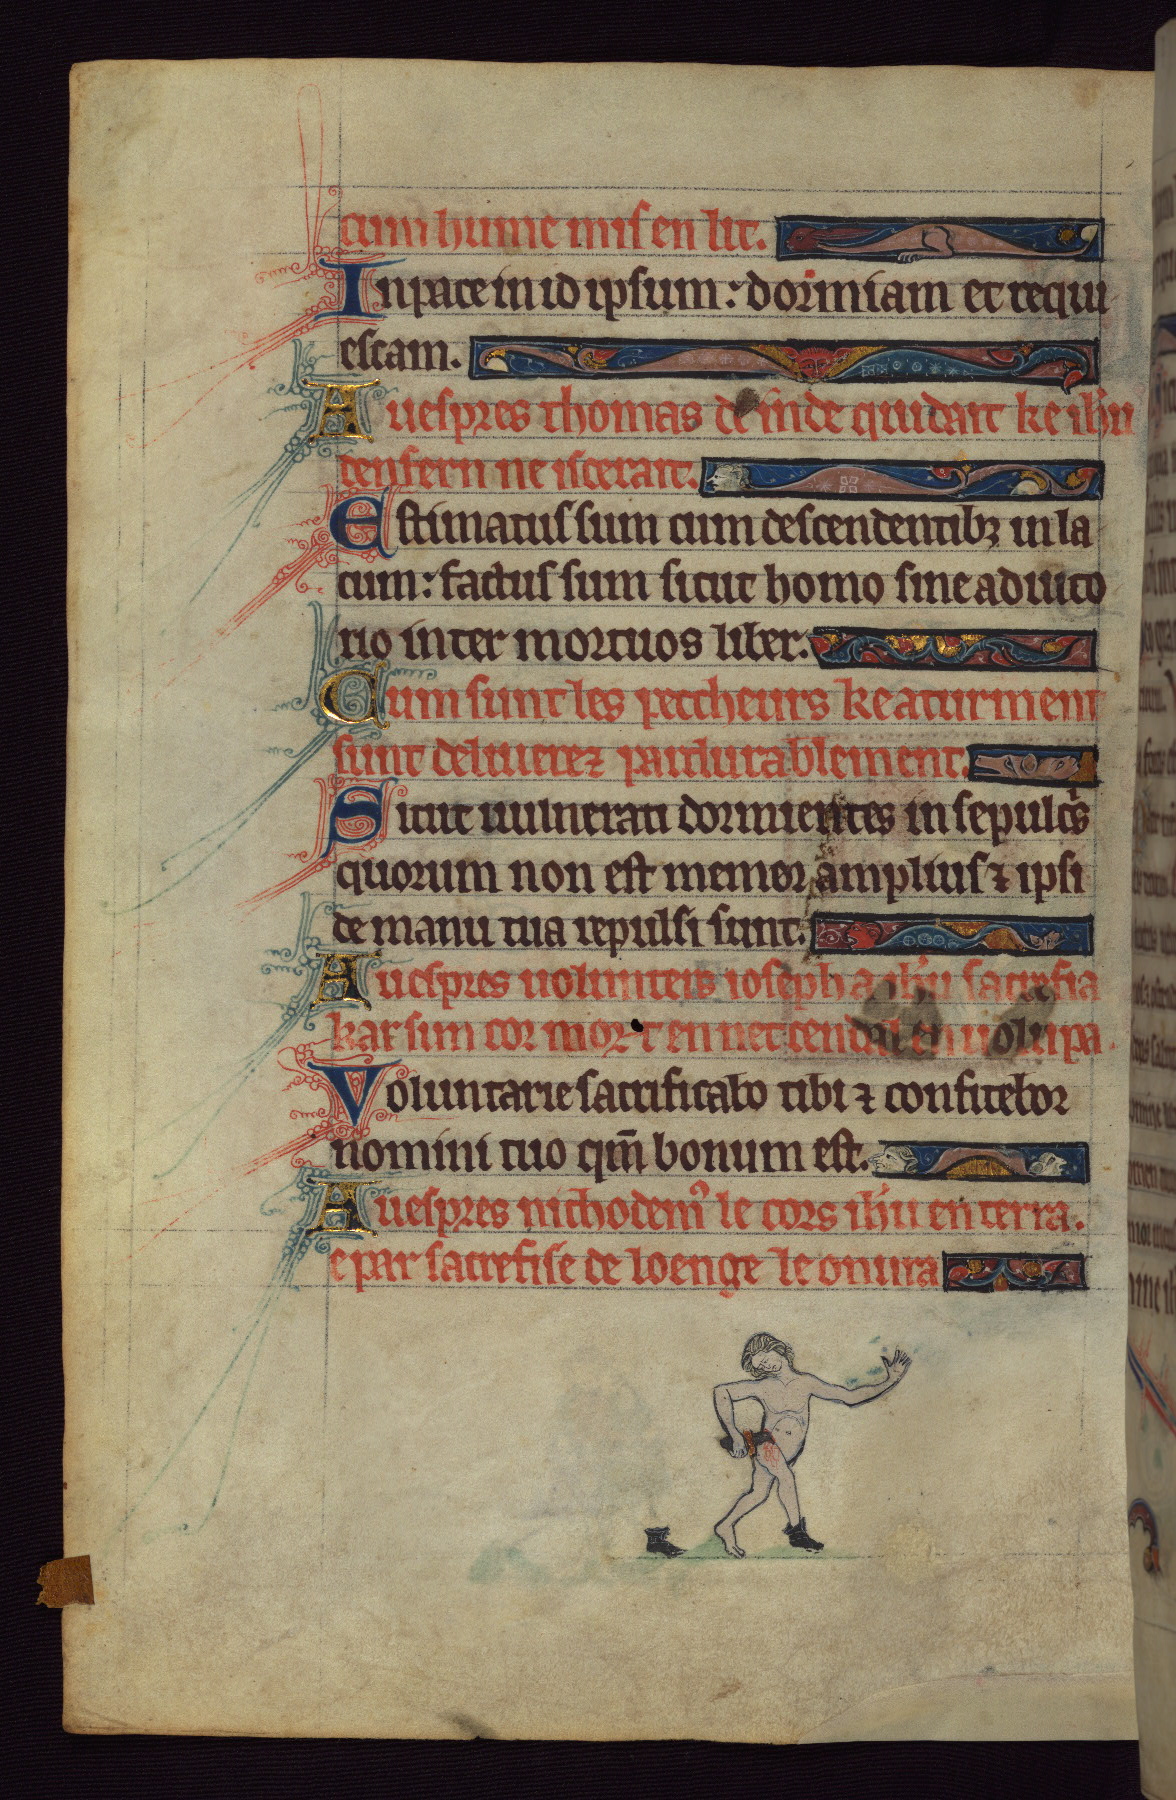 Walters Ms. W.102, Book of hours